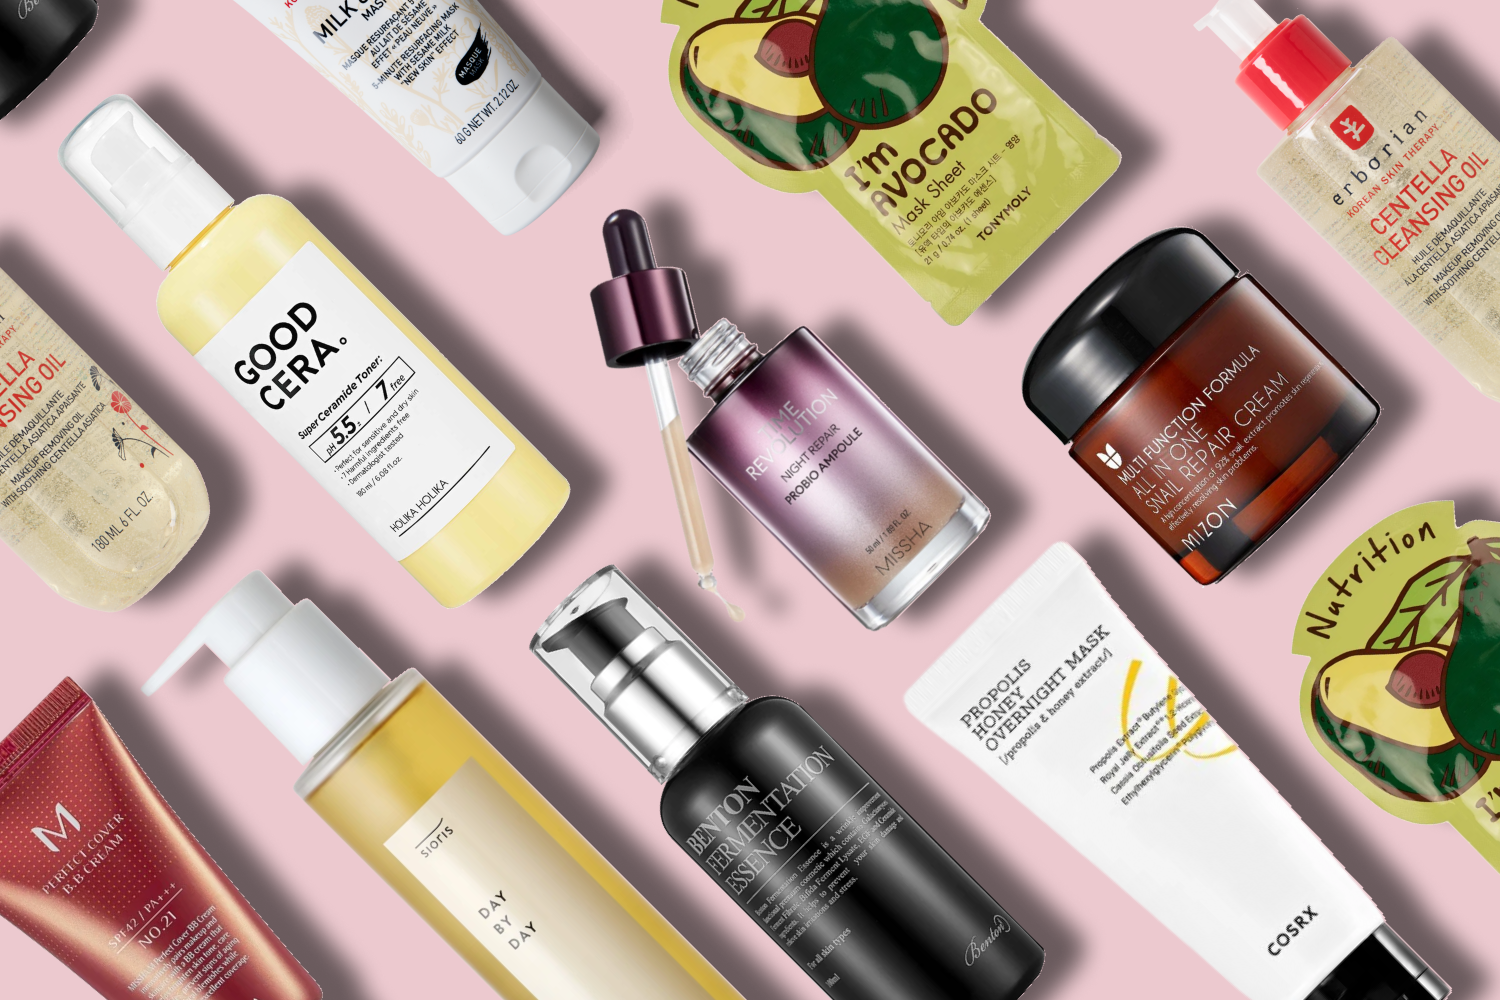 Best K-Beauty Products From Top Korean Skin Care Brands